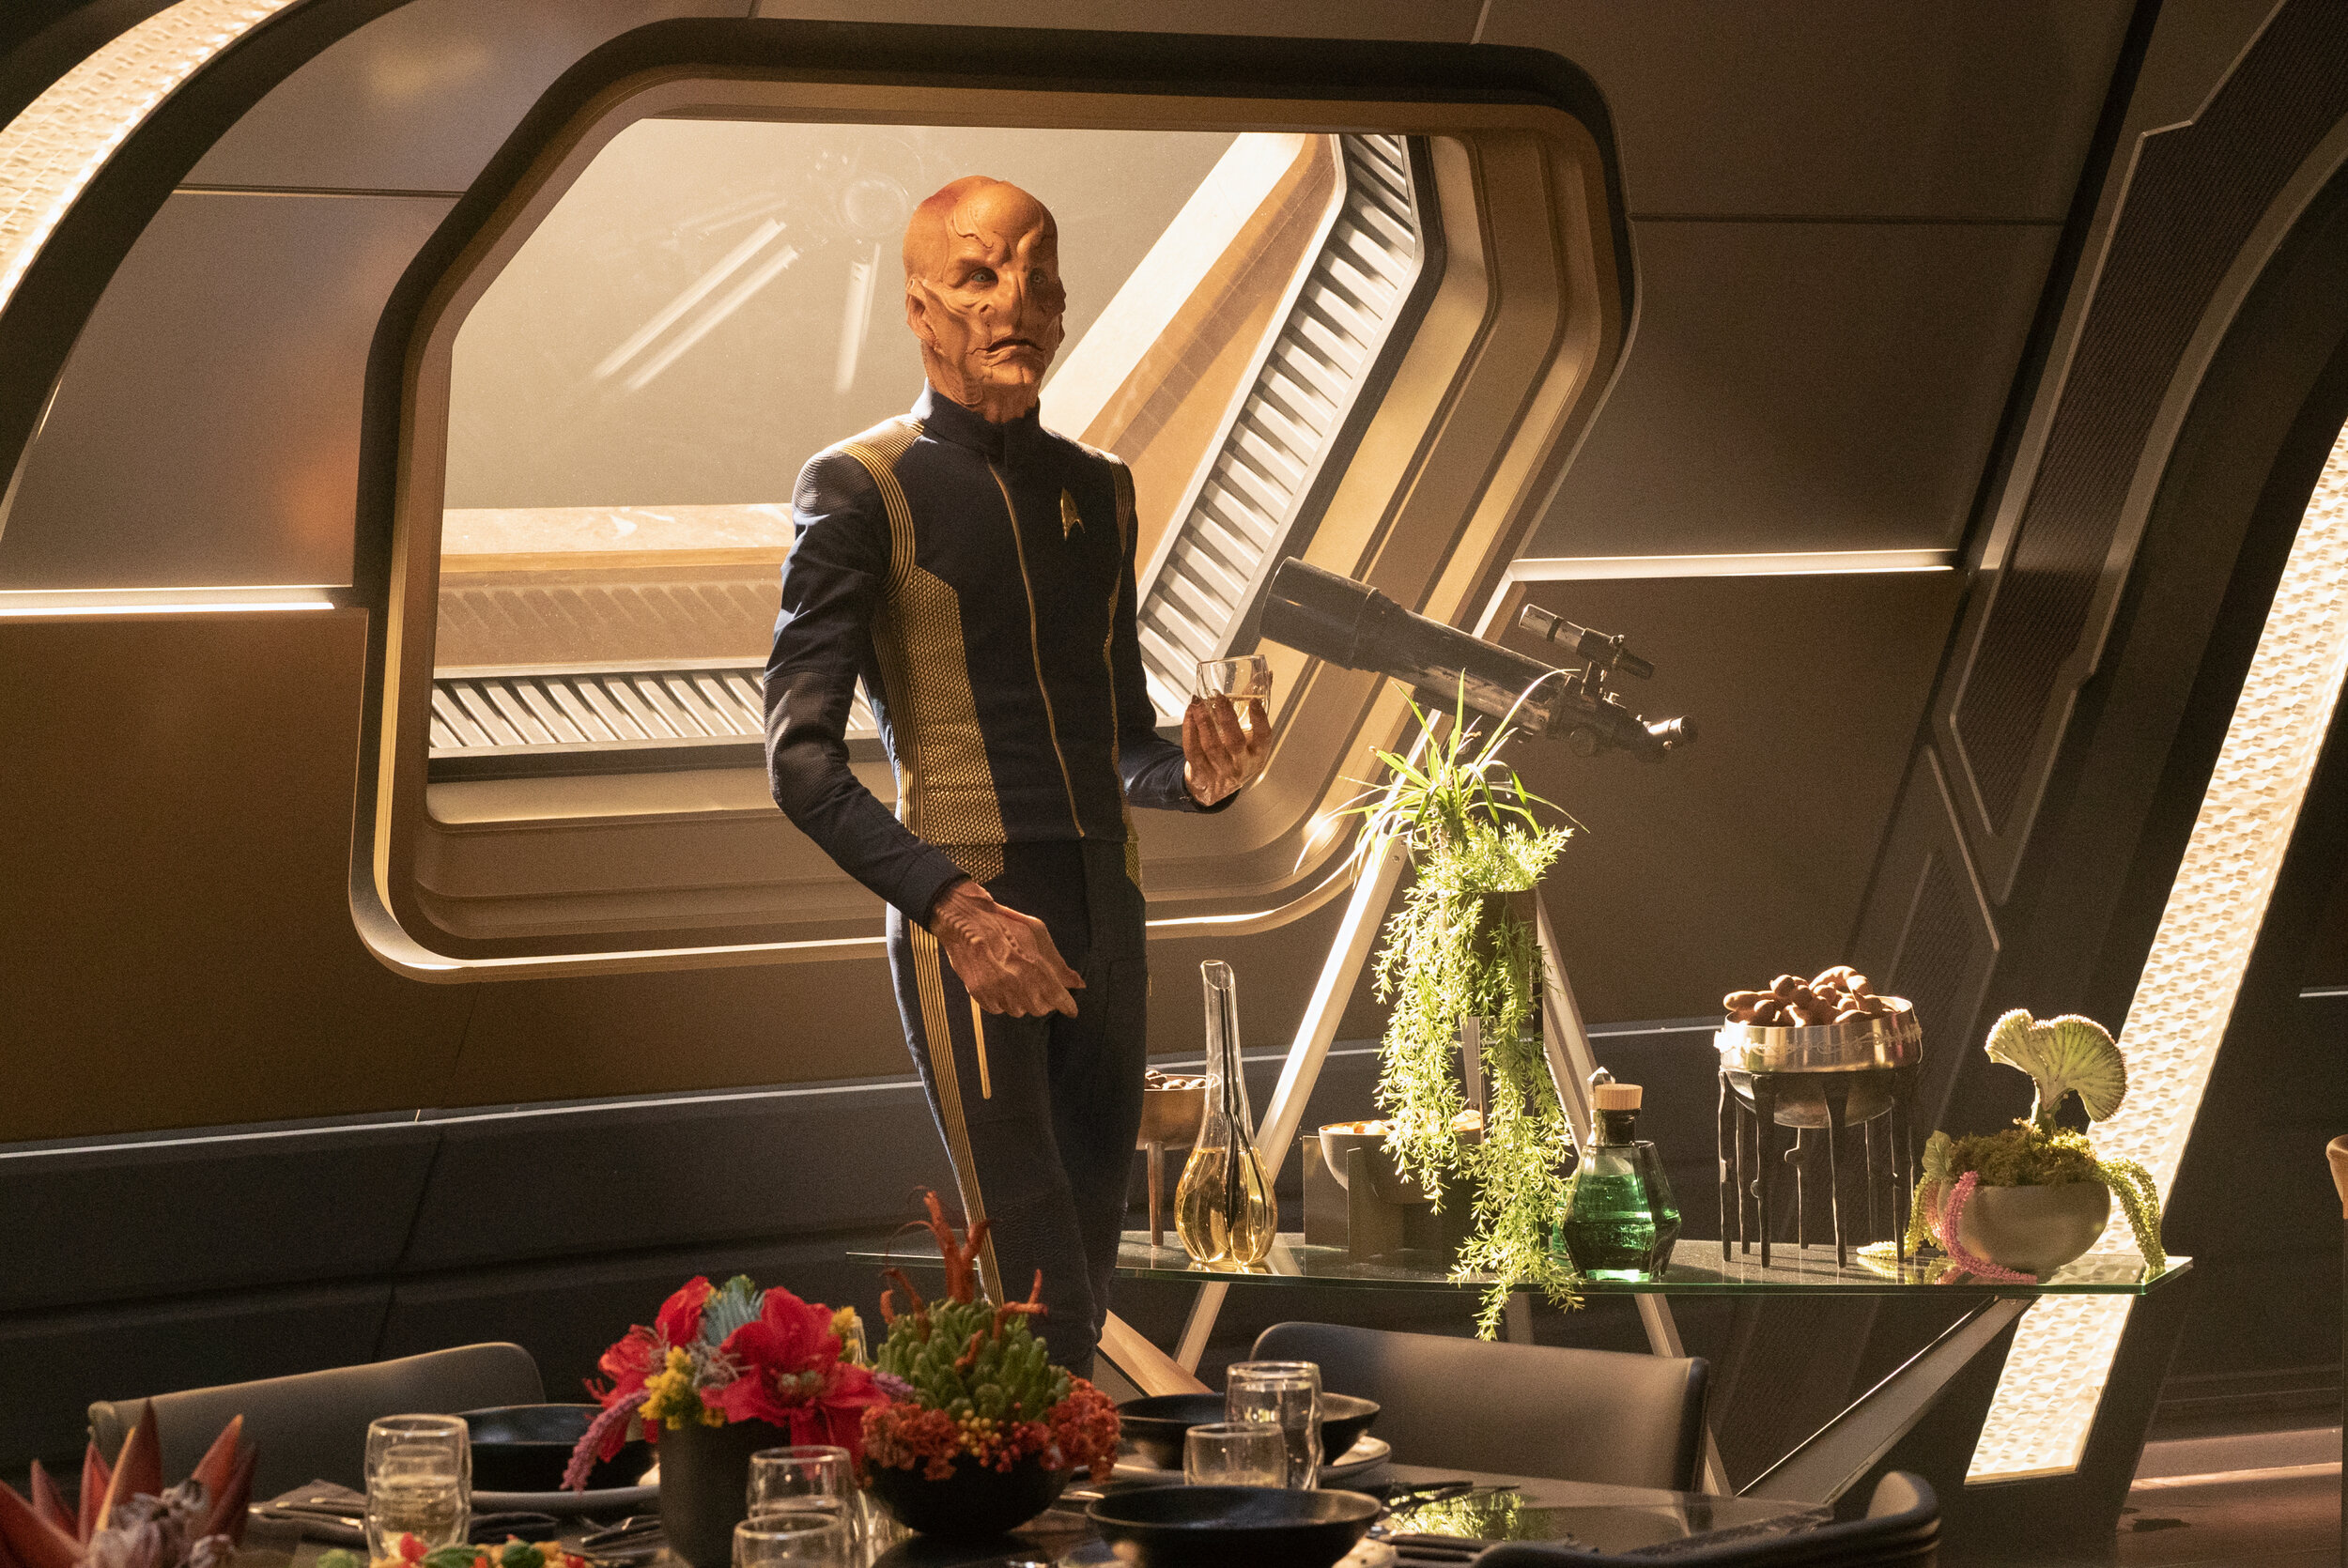   "Forget Me Not" -- Ep#304 -- Pictured: Doug Jones as Saru of the CBS All Access series STAR TREK: DISCOVERY. Photo Cr: Michael Gibson/CBS ©2020 CBS Interactive, Inc. All Rights Reserved.  